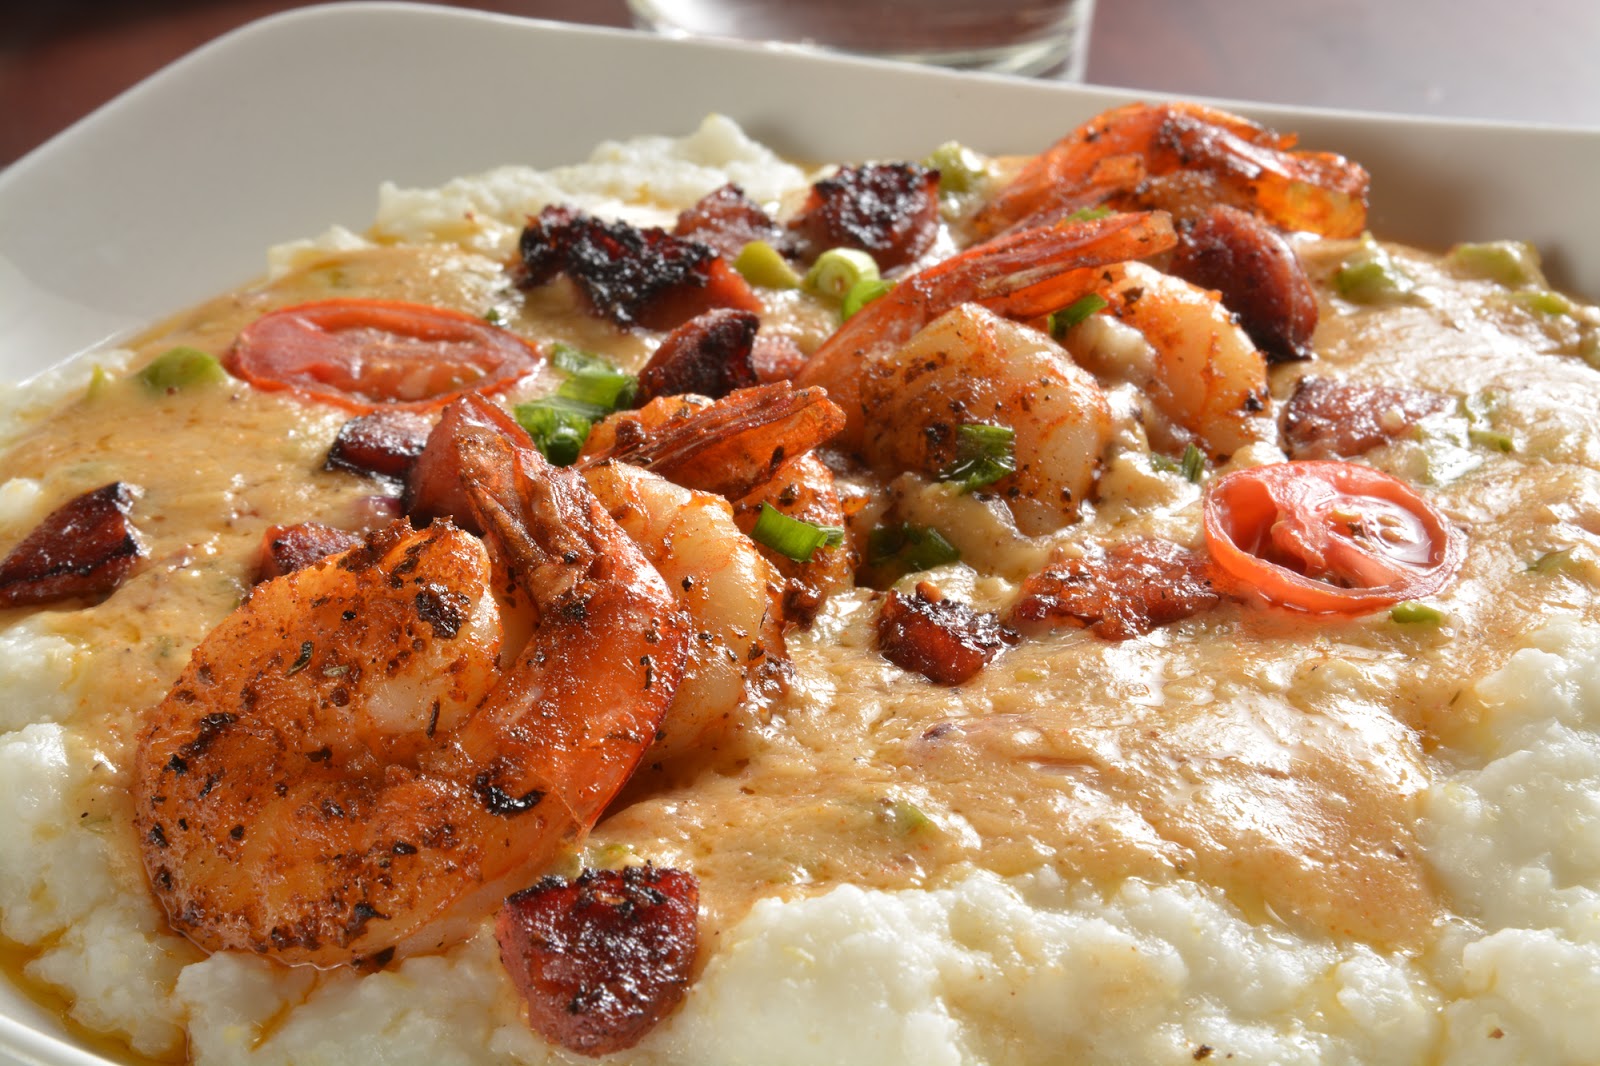 Isle of Palms is home to a variety of casual to sophisticated restaurants that provide anything from pizza to seafood.